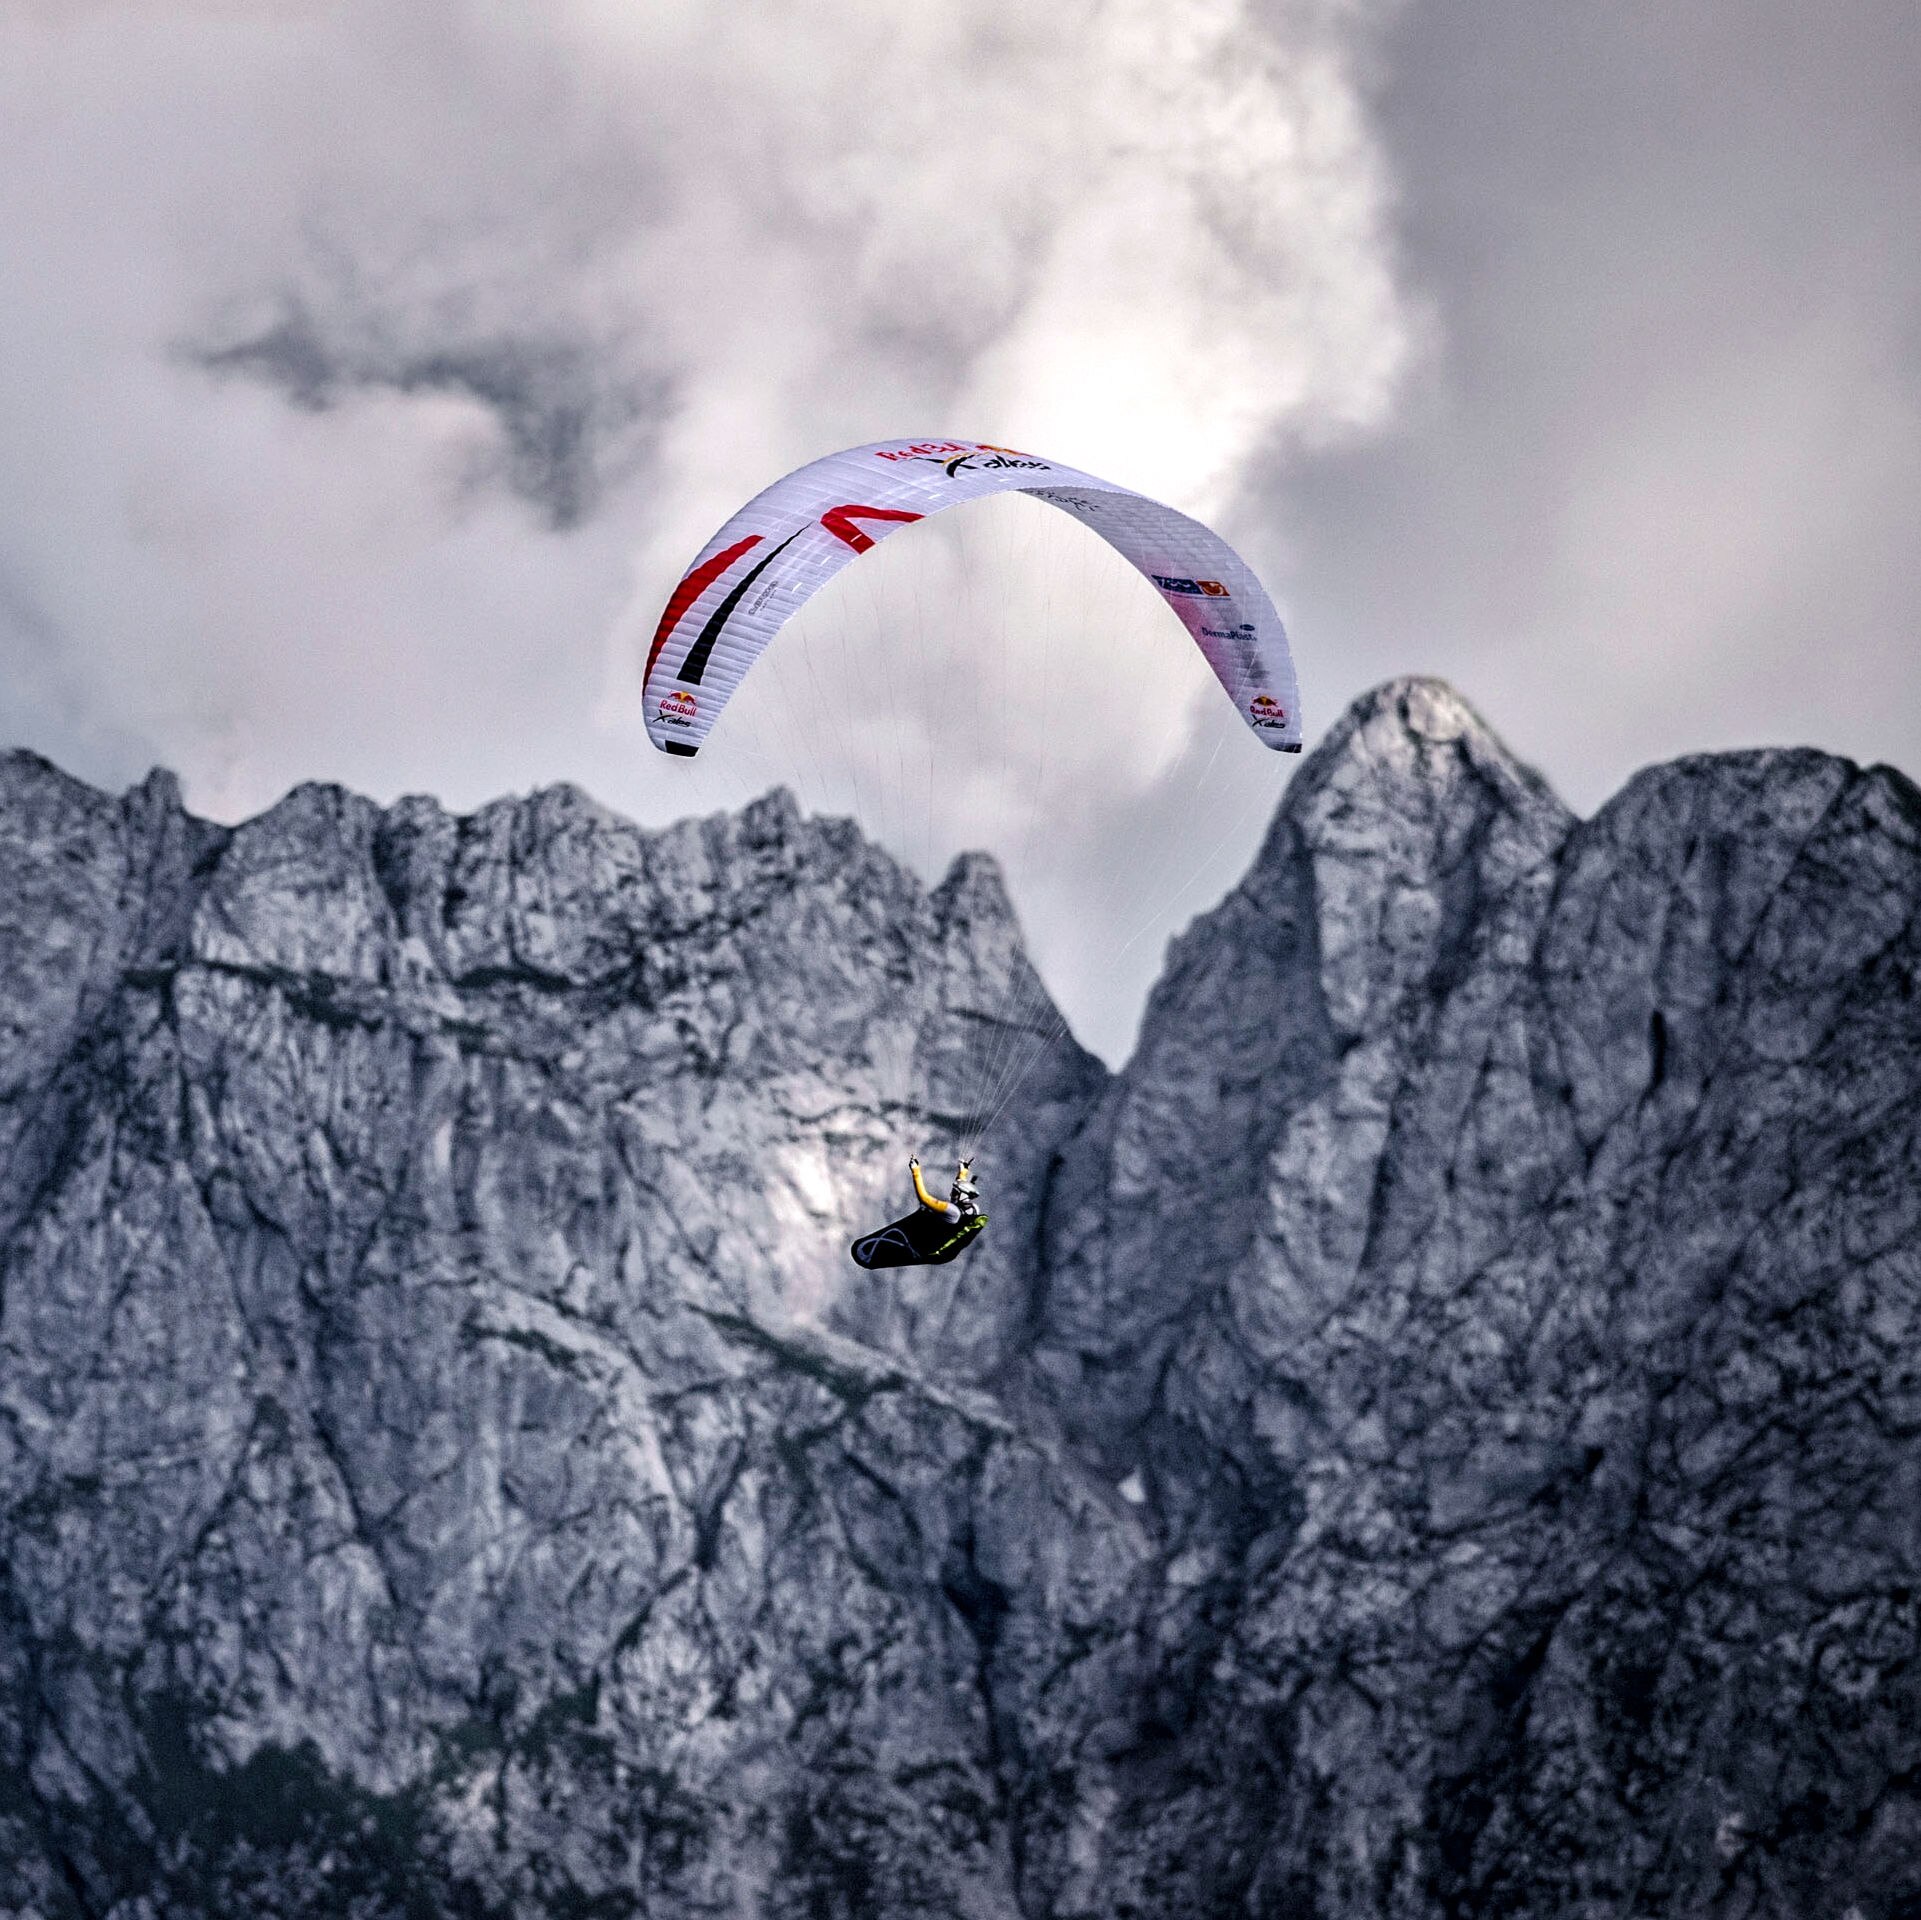 About Red Bull X-Alps